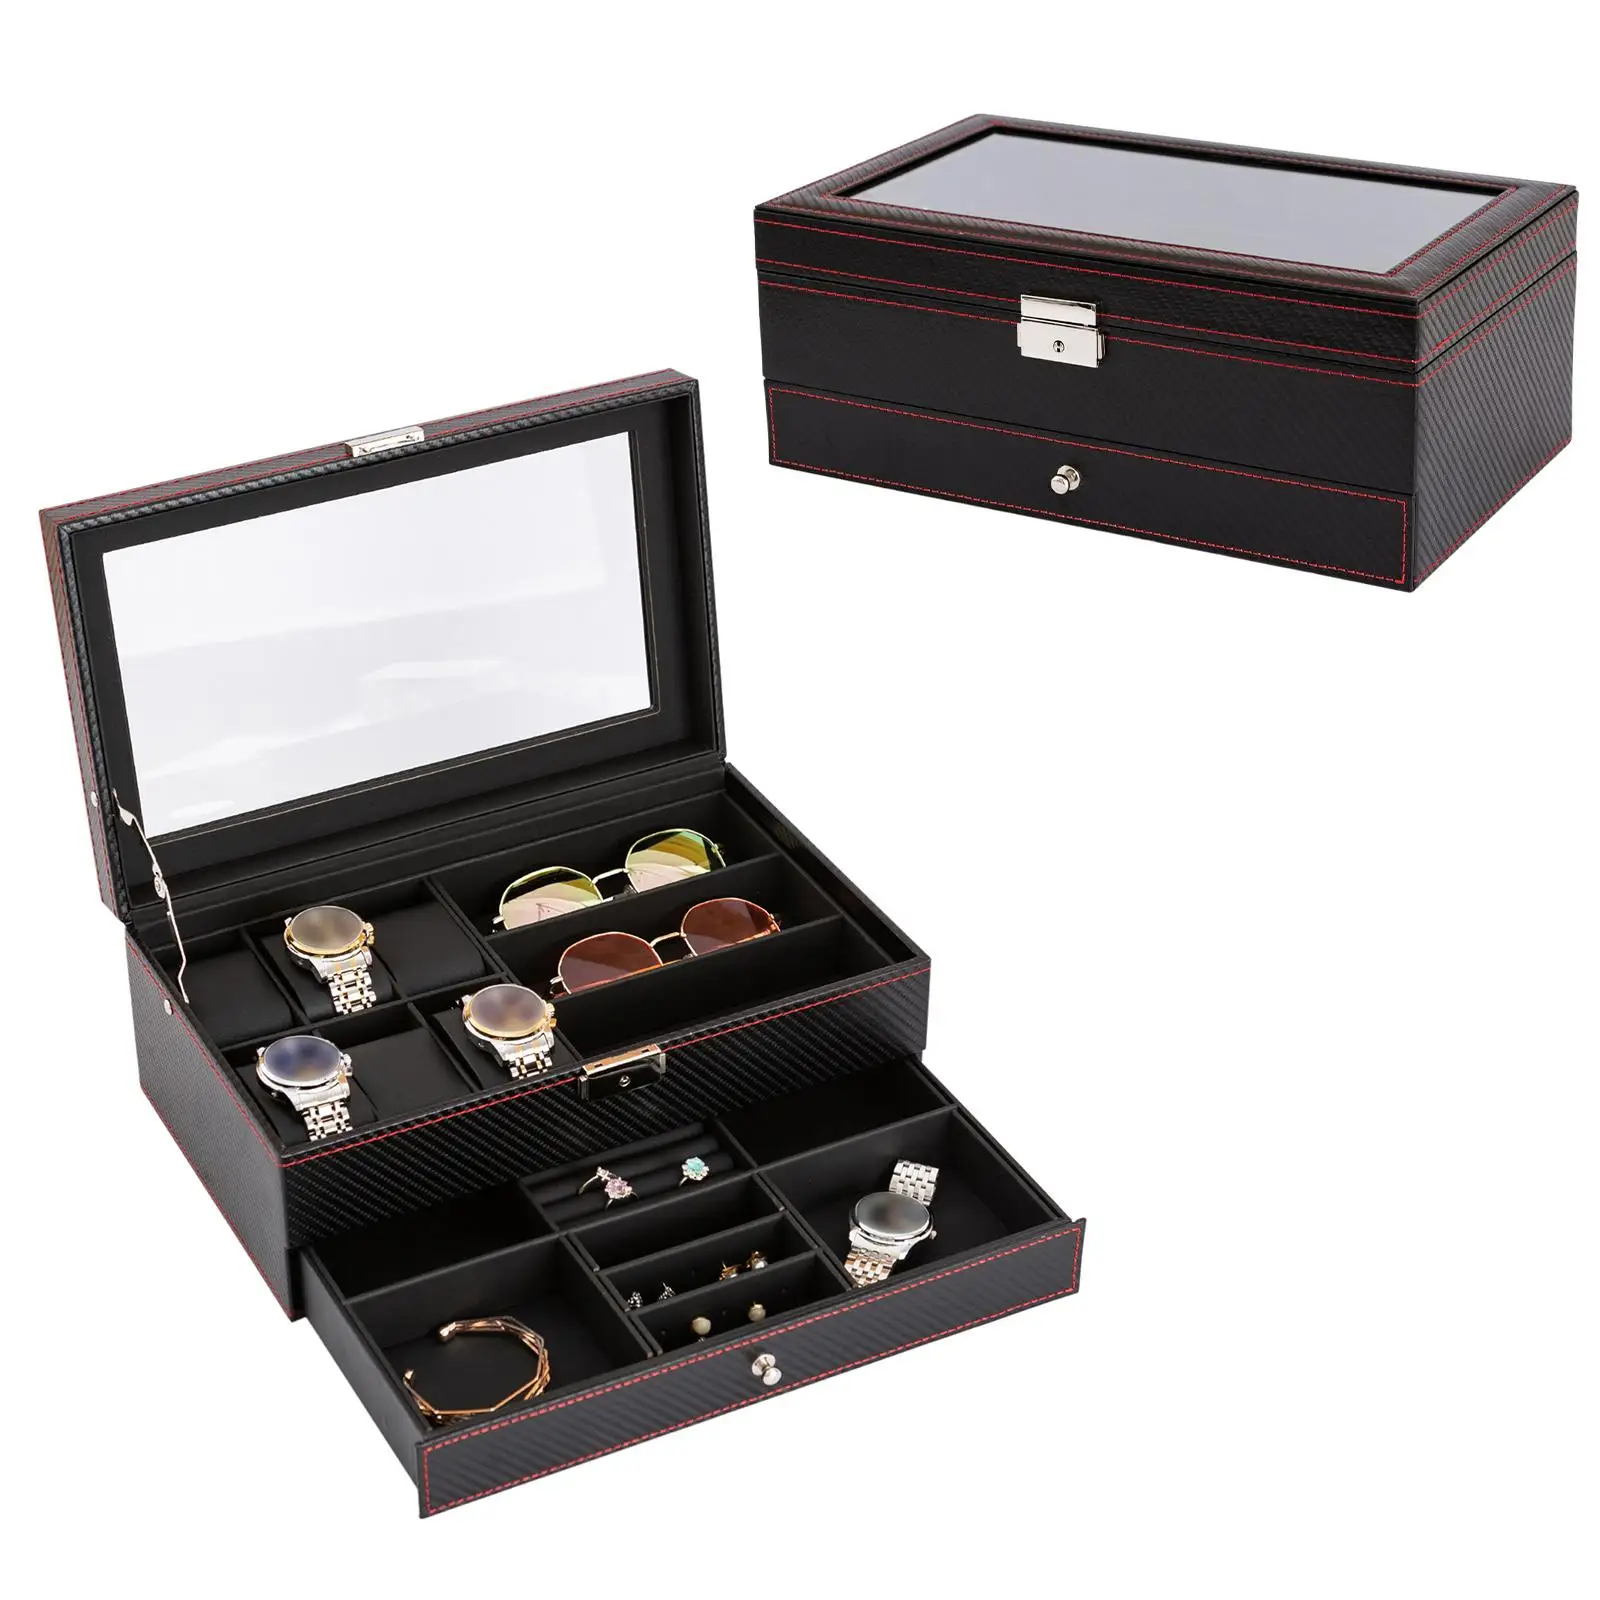 Watch Storage Box Lockable Multifunctional for Shop Display Home Decoration